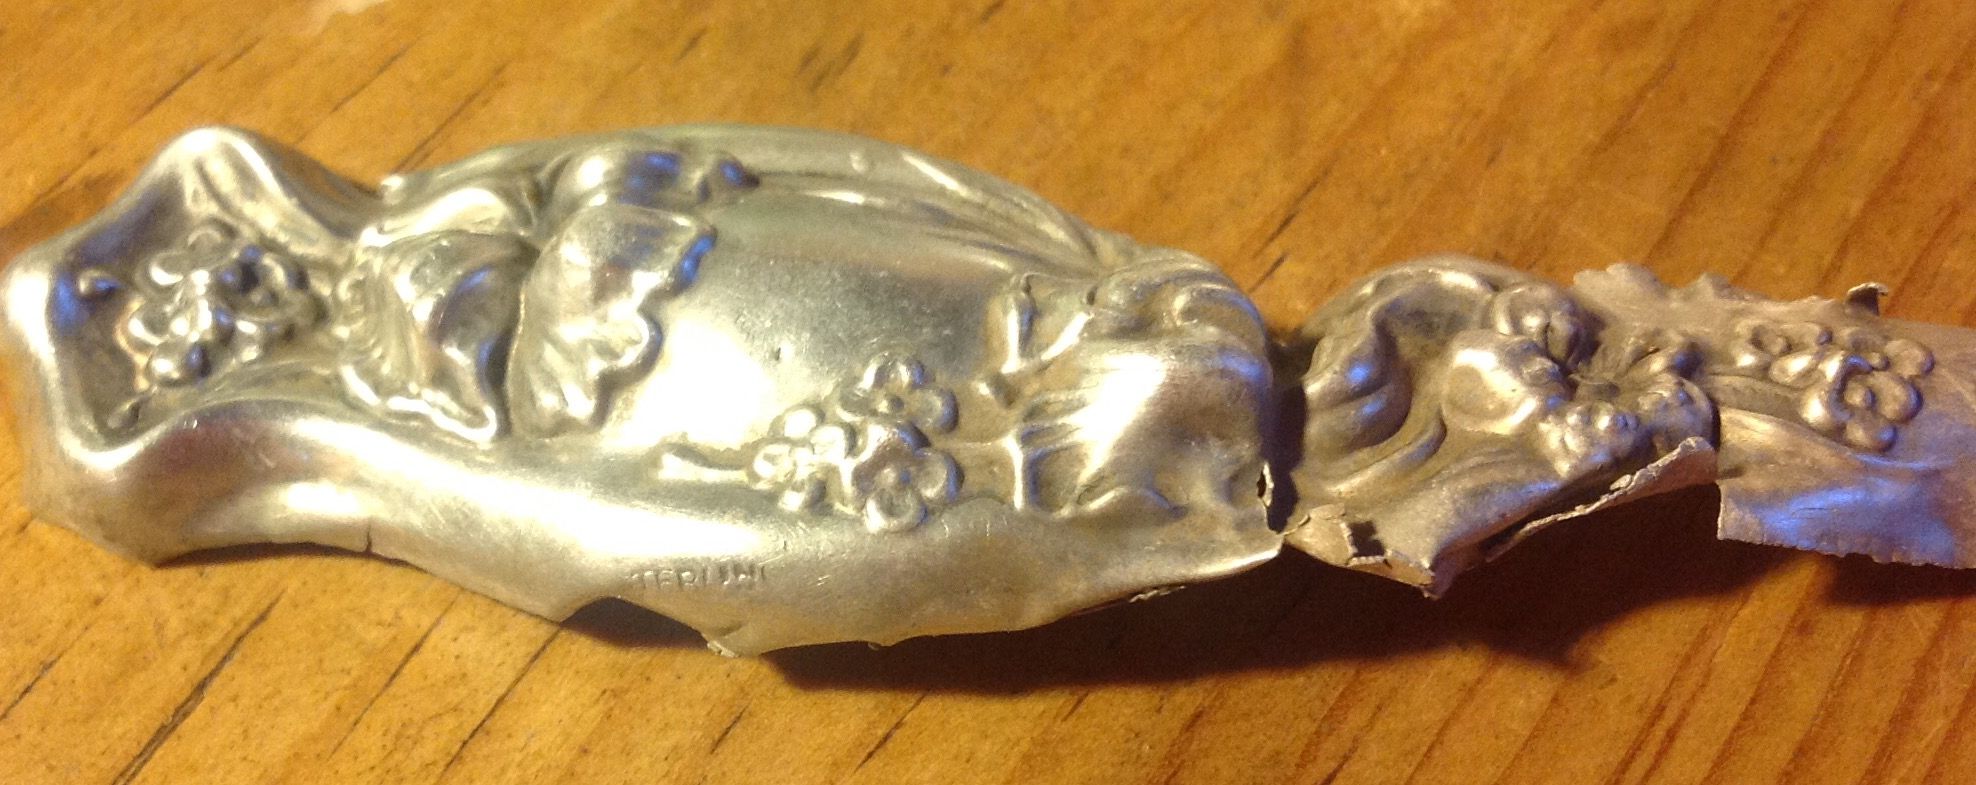 Sterling Silver Vintage
Hair Brush Cover (?)
Found 14/05/17
Columbus, Ms.